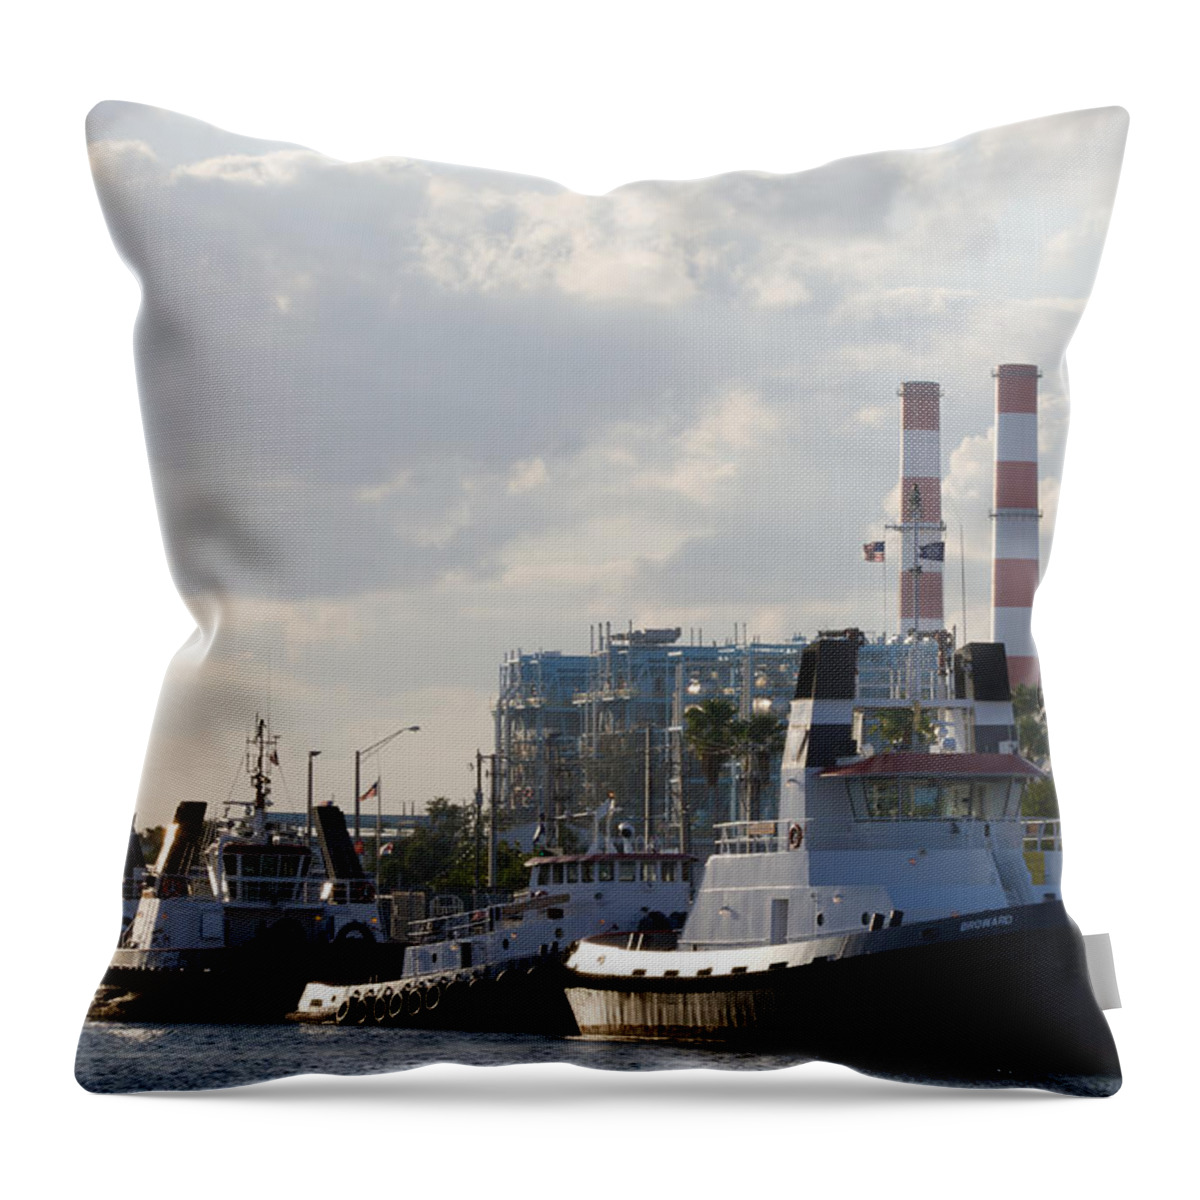 Boat Throw Pillow featuring the photograph Tugs by Ed Gleichman